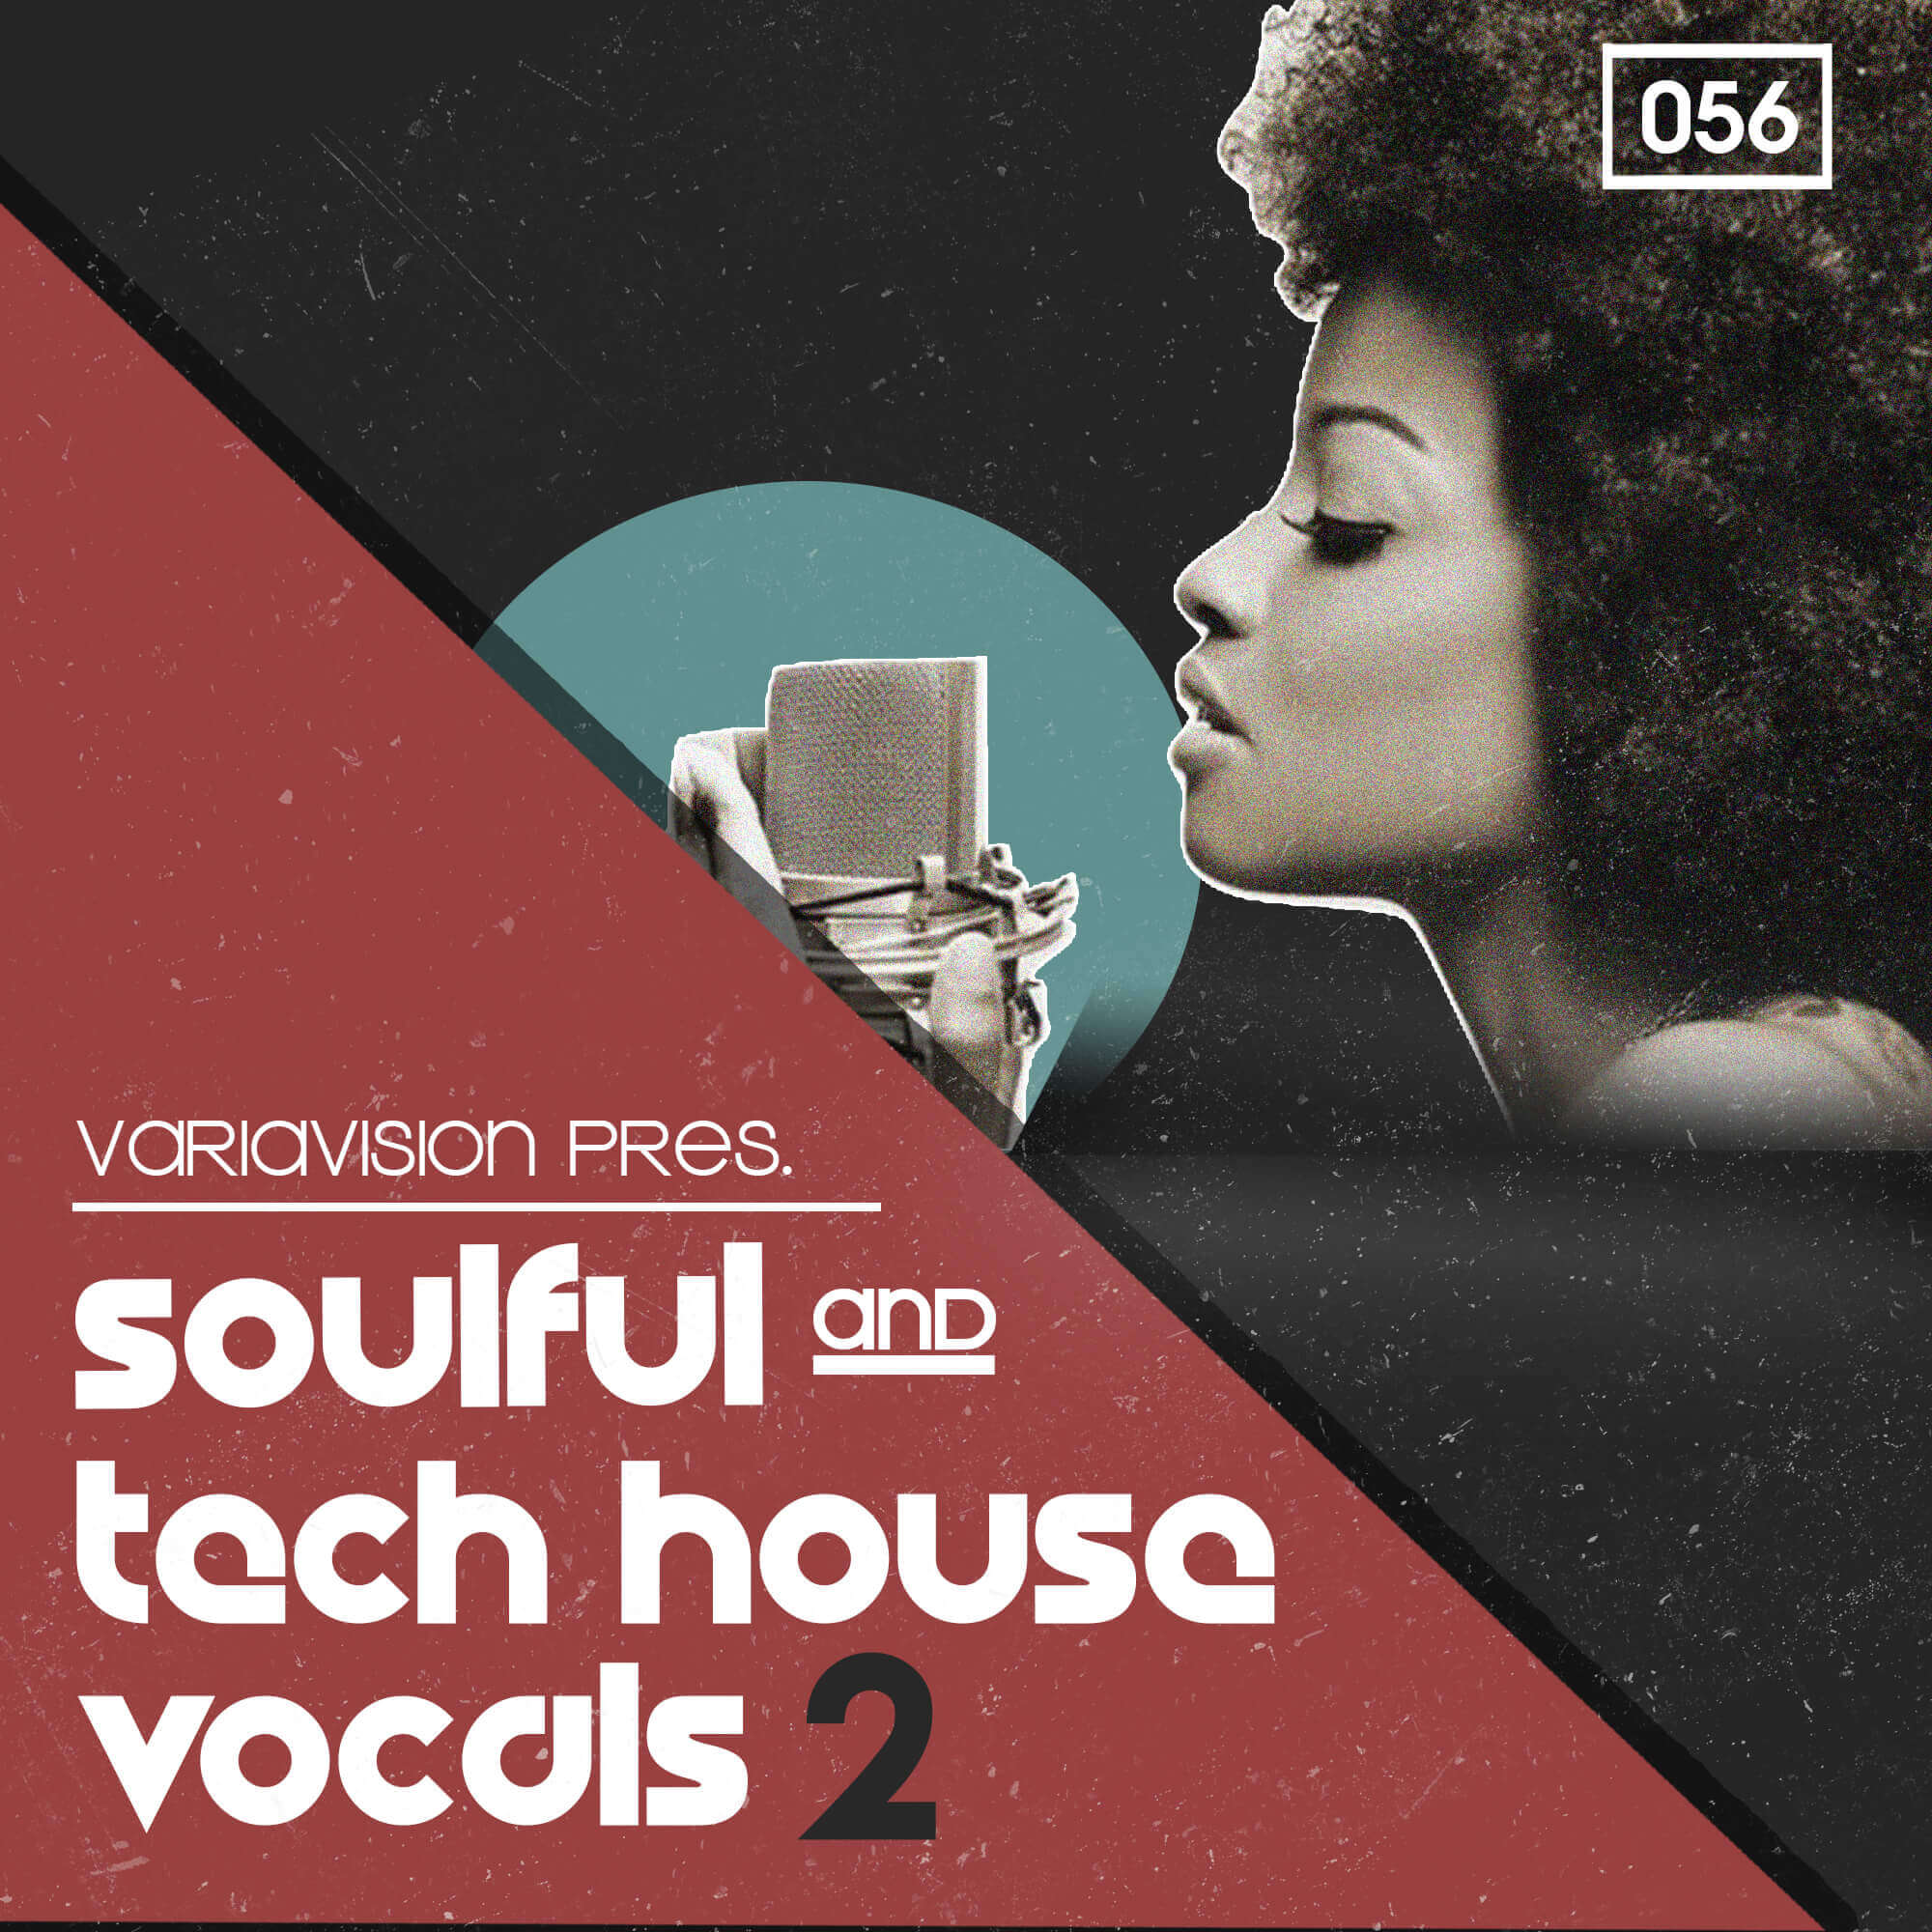 Soulful-Tech-House-Vocals-2-1-1.jpg